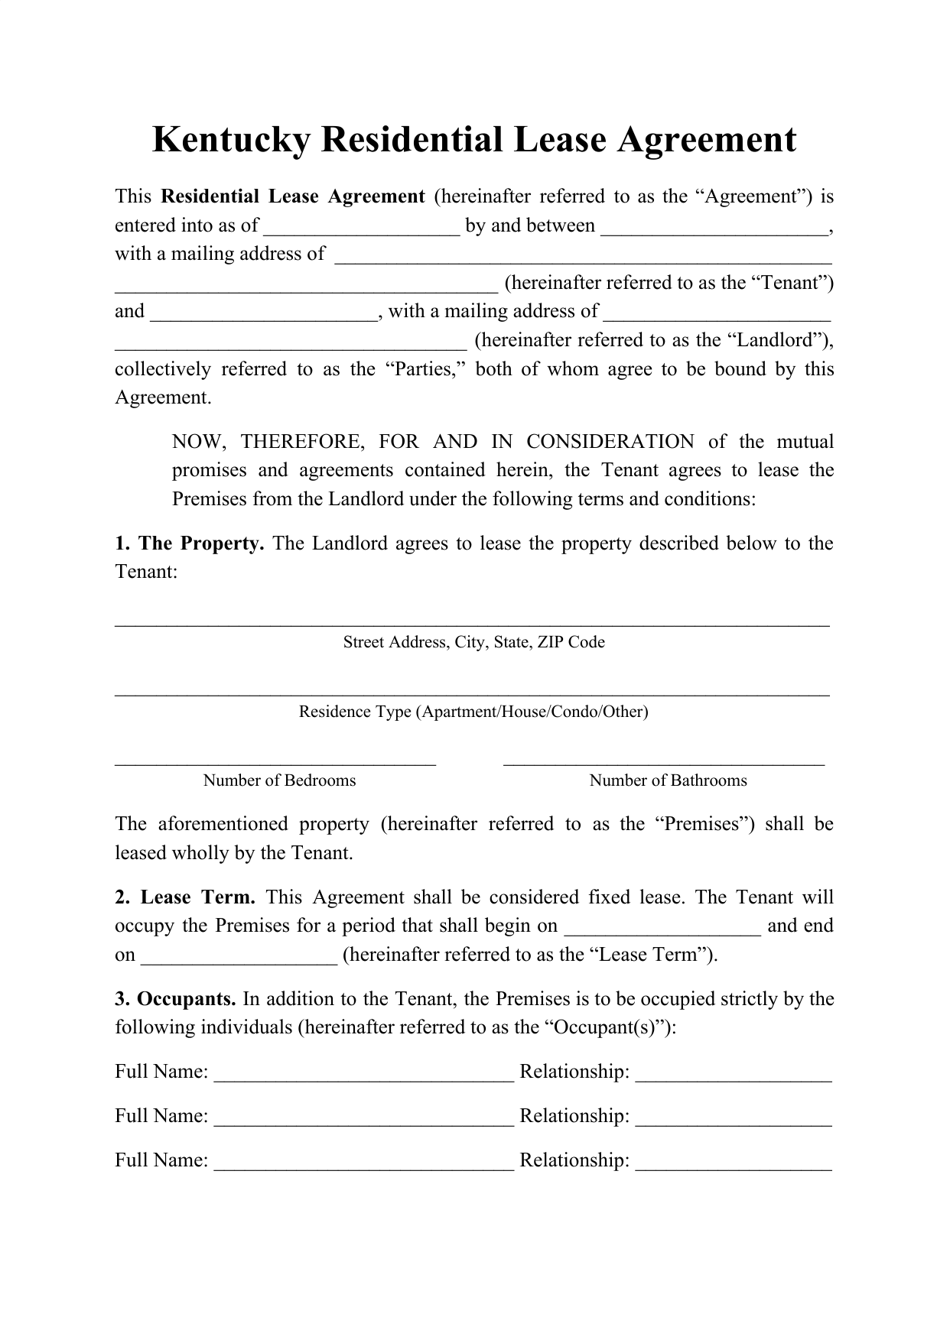 Residential Lease Agreement Template - Kentucky, Page 1